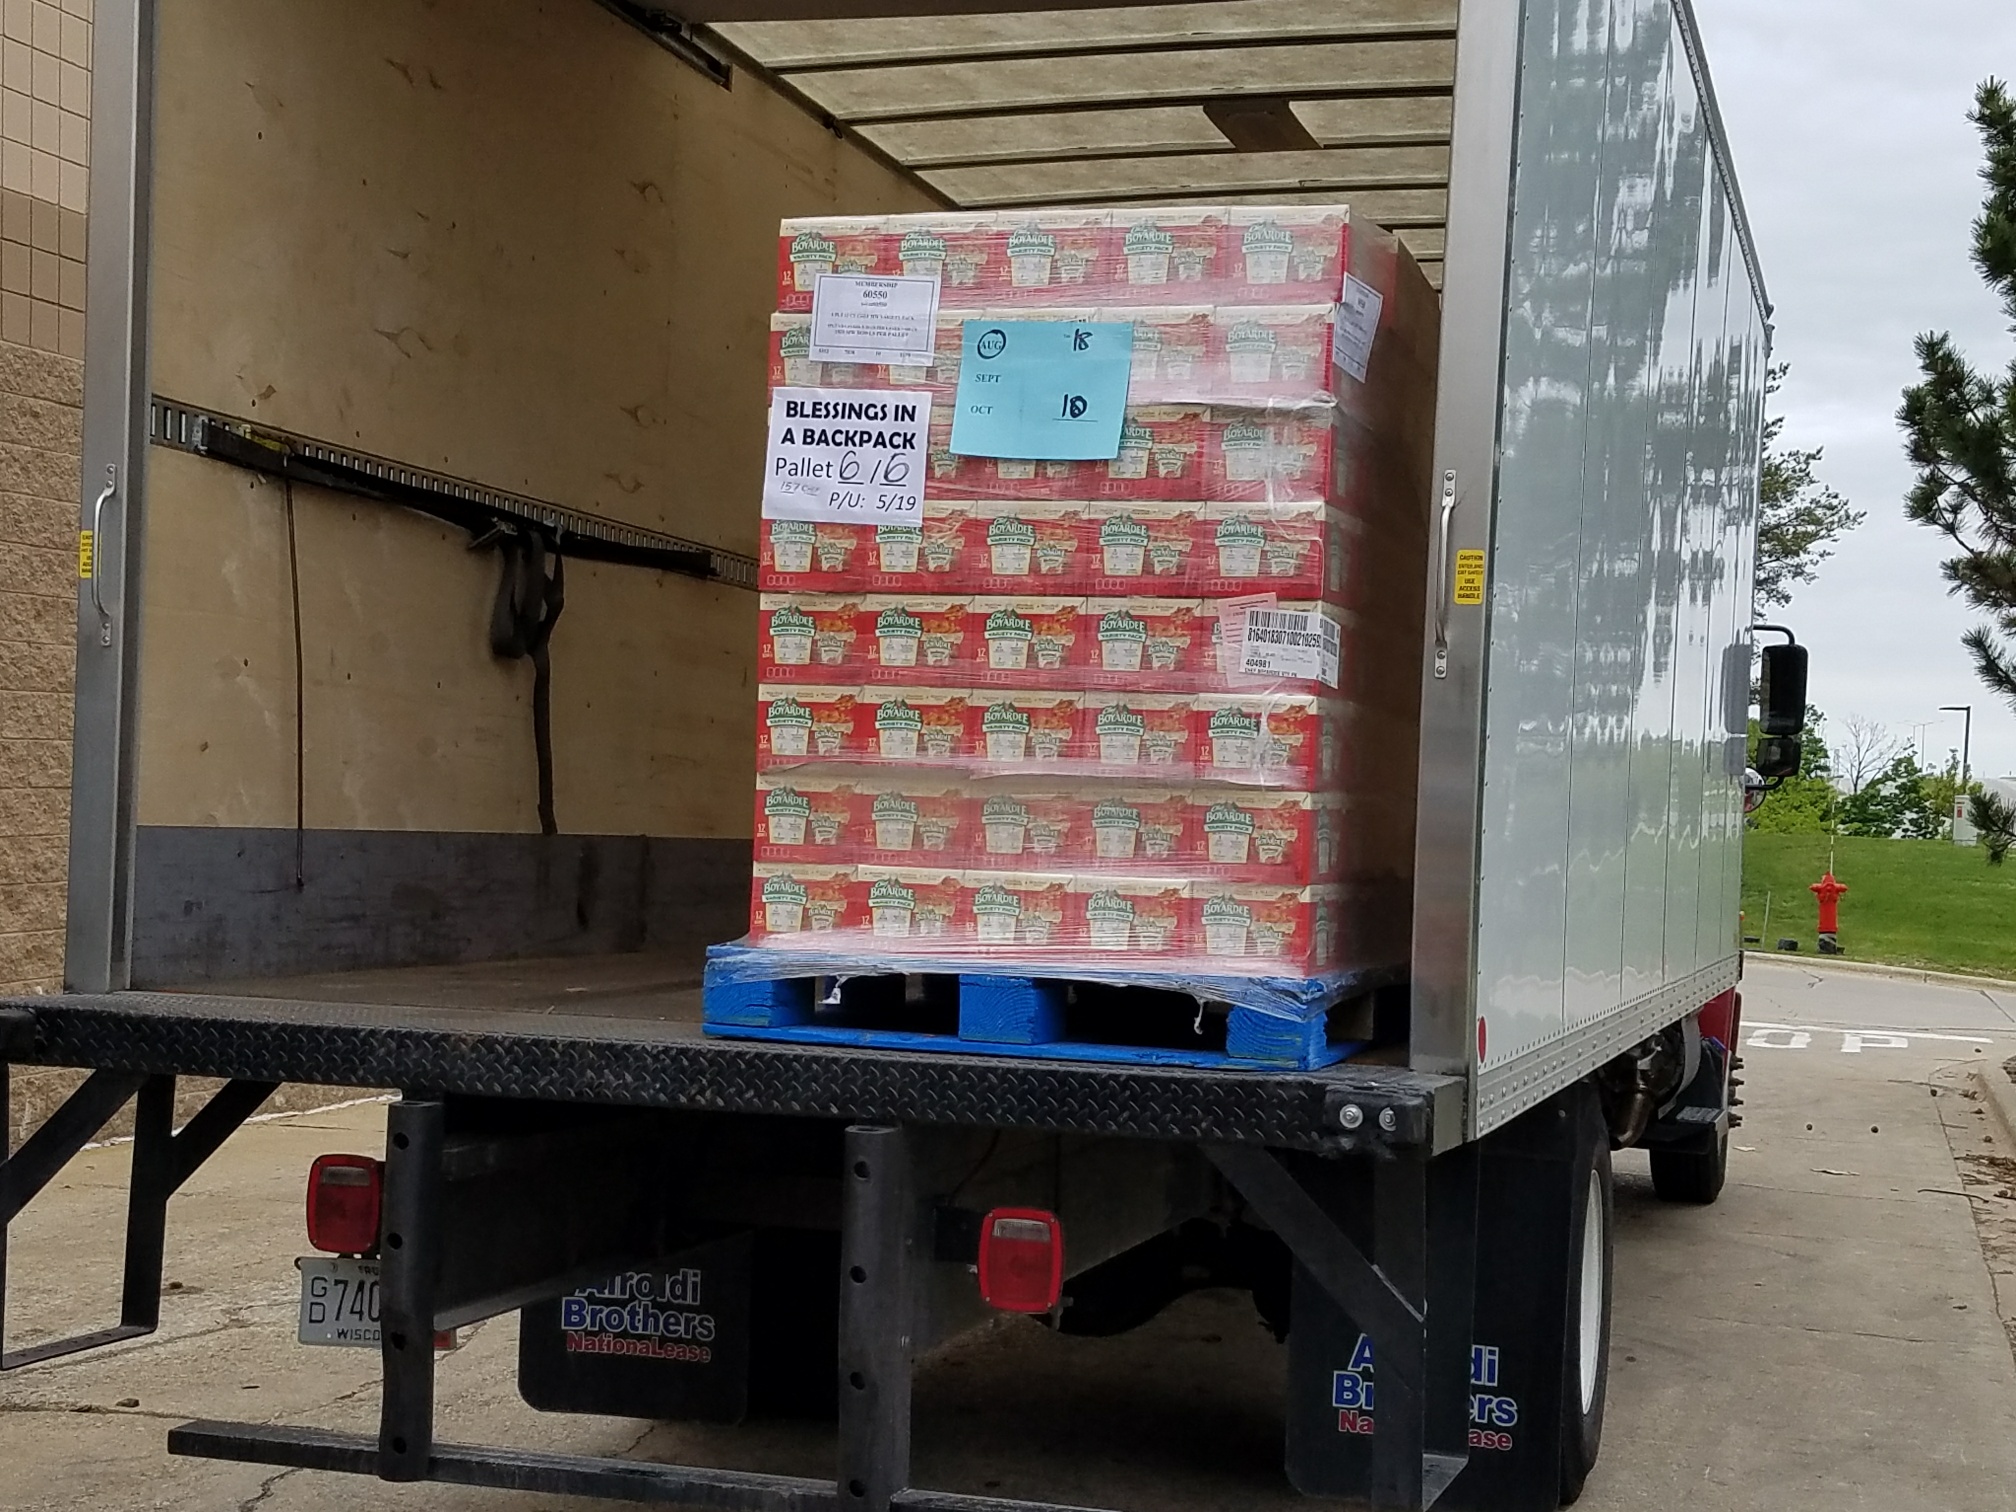 EFCO truck loaded up with food for Waukesha County children in need